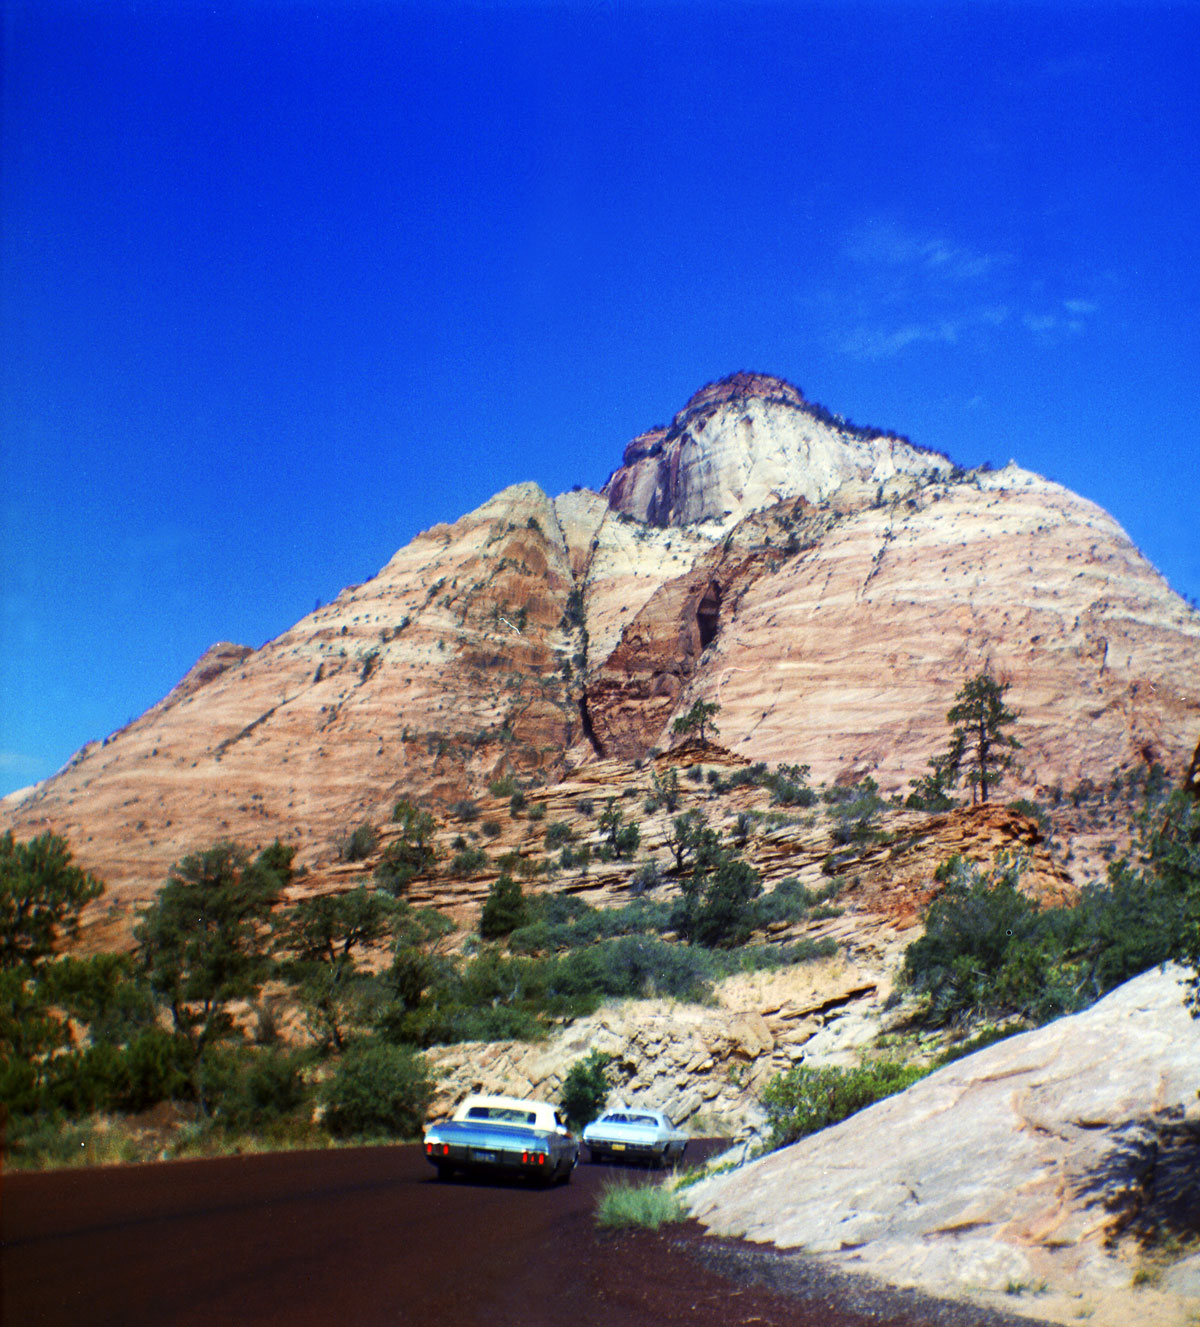 Here's another shot from my dad and grandparents' trip from Illinois back to LA through Zion. View full size.